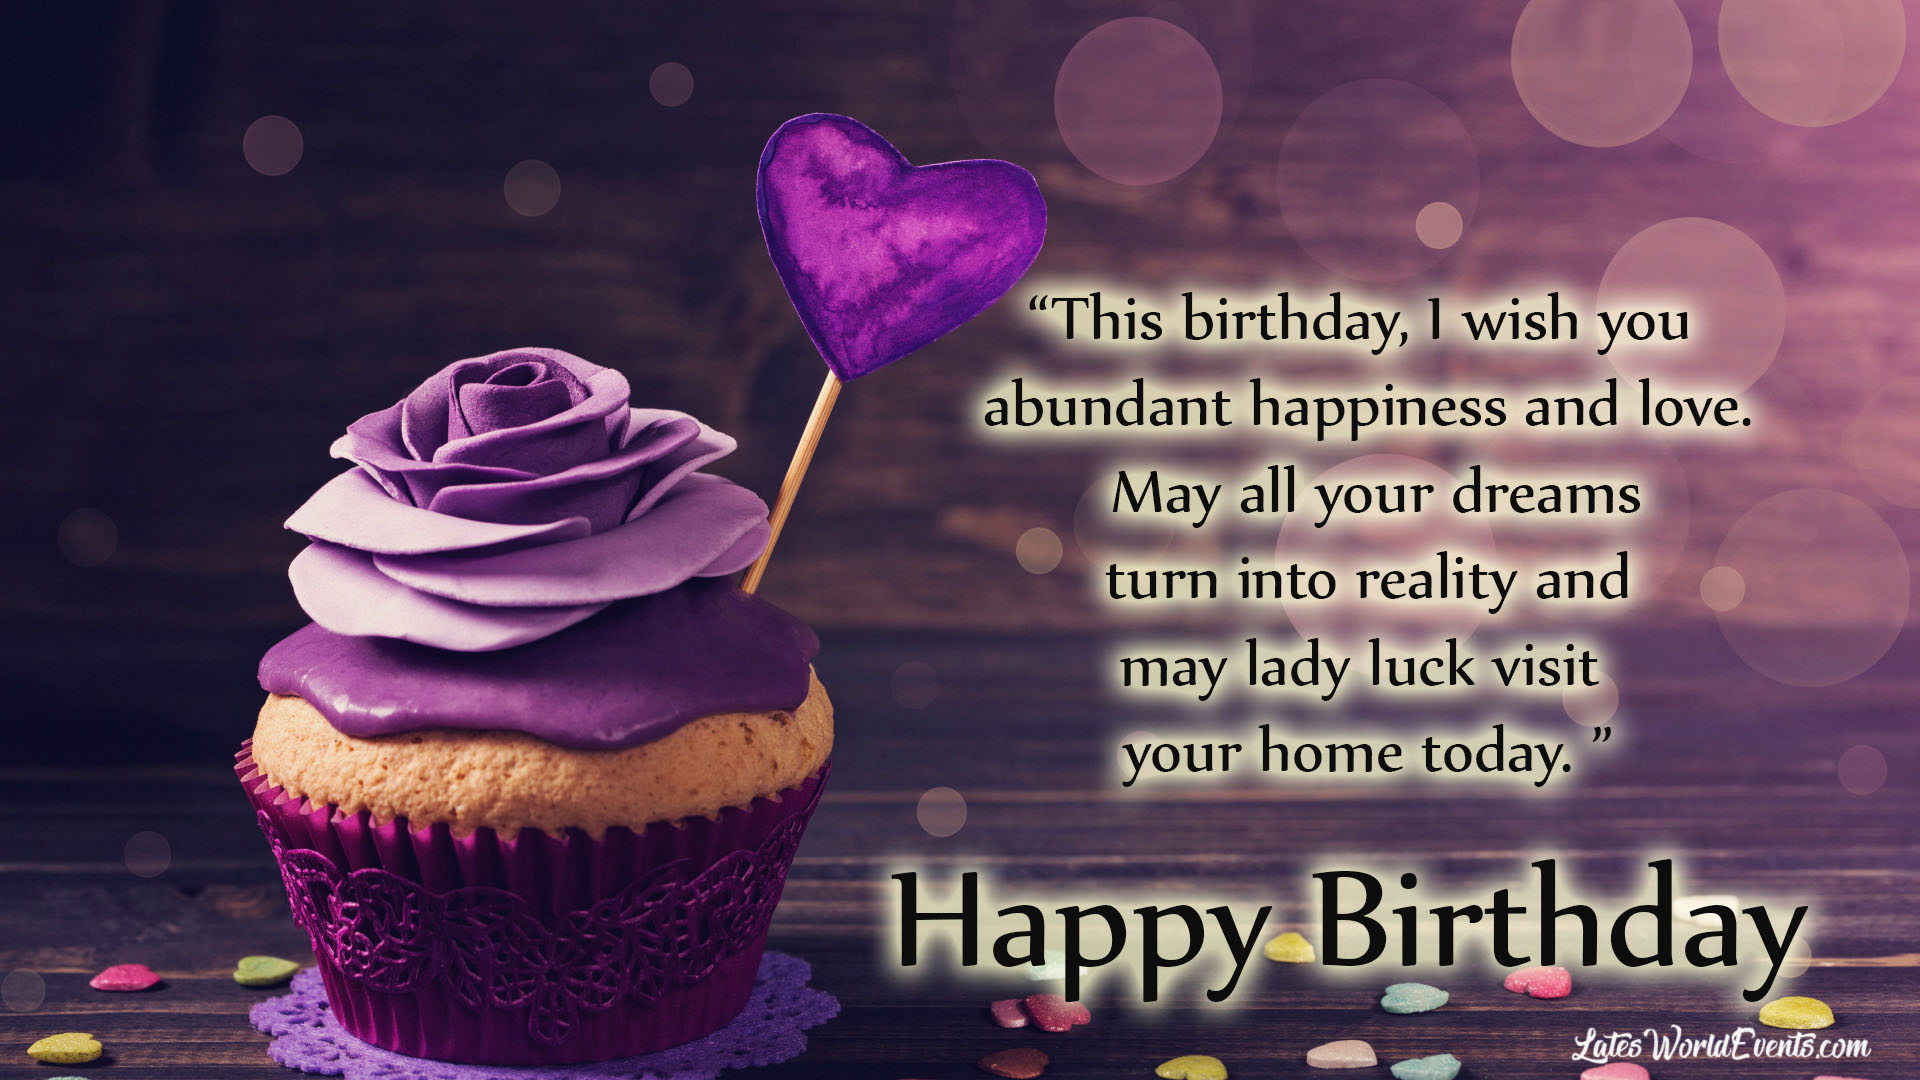 Impresive-birthday-quotes-for-special-friend